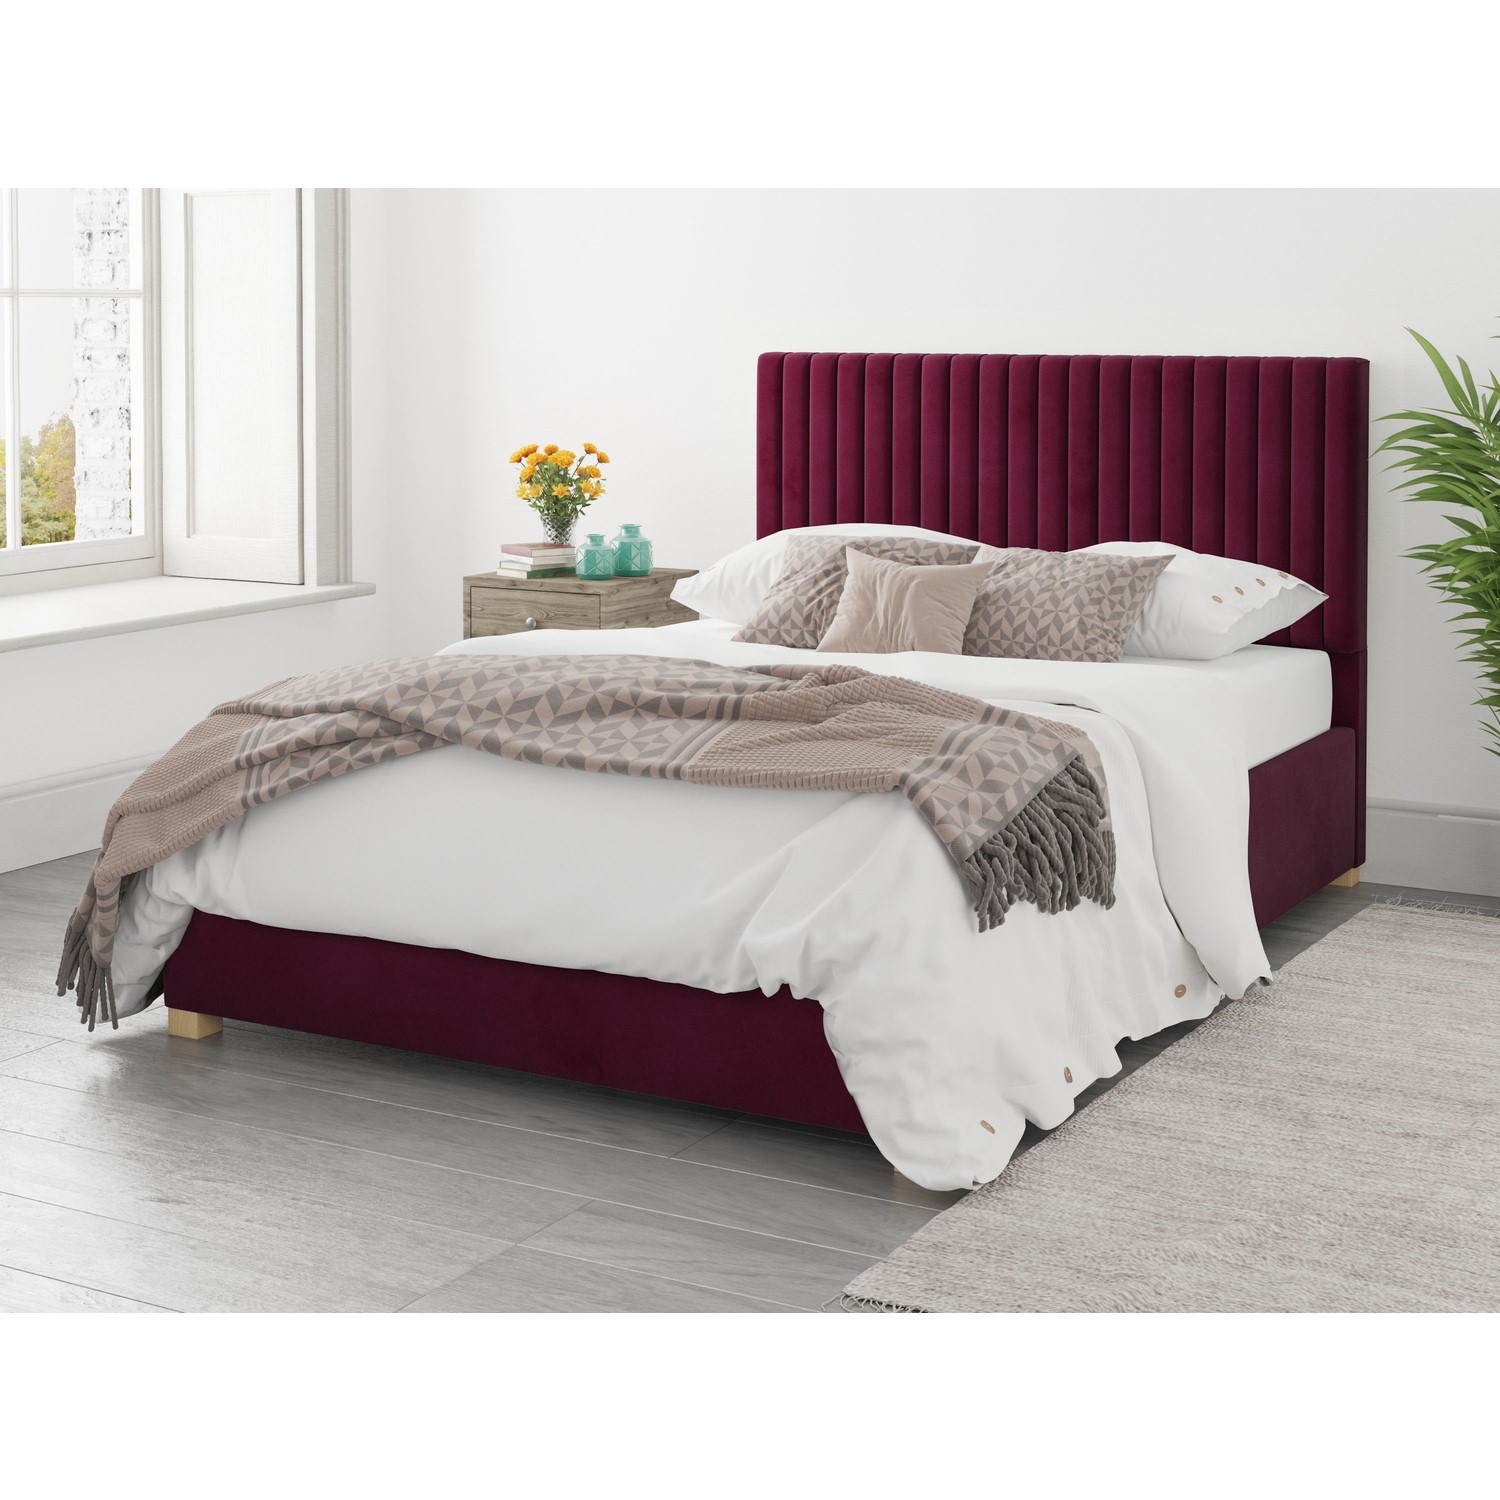 Read more about Berry red velvet king size ottoman bed piccadilly aspire